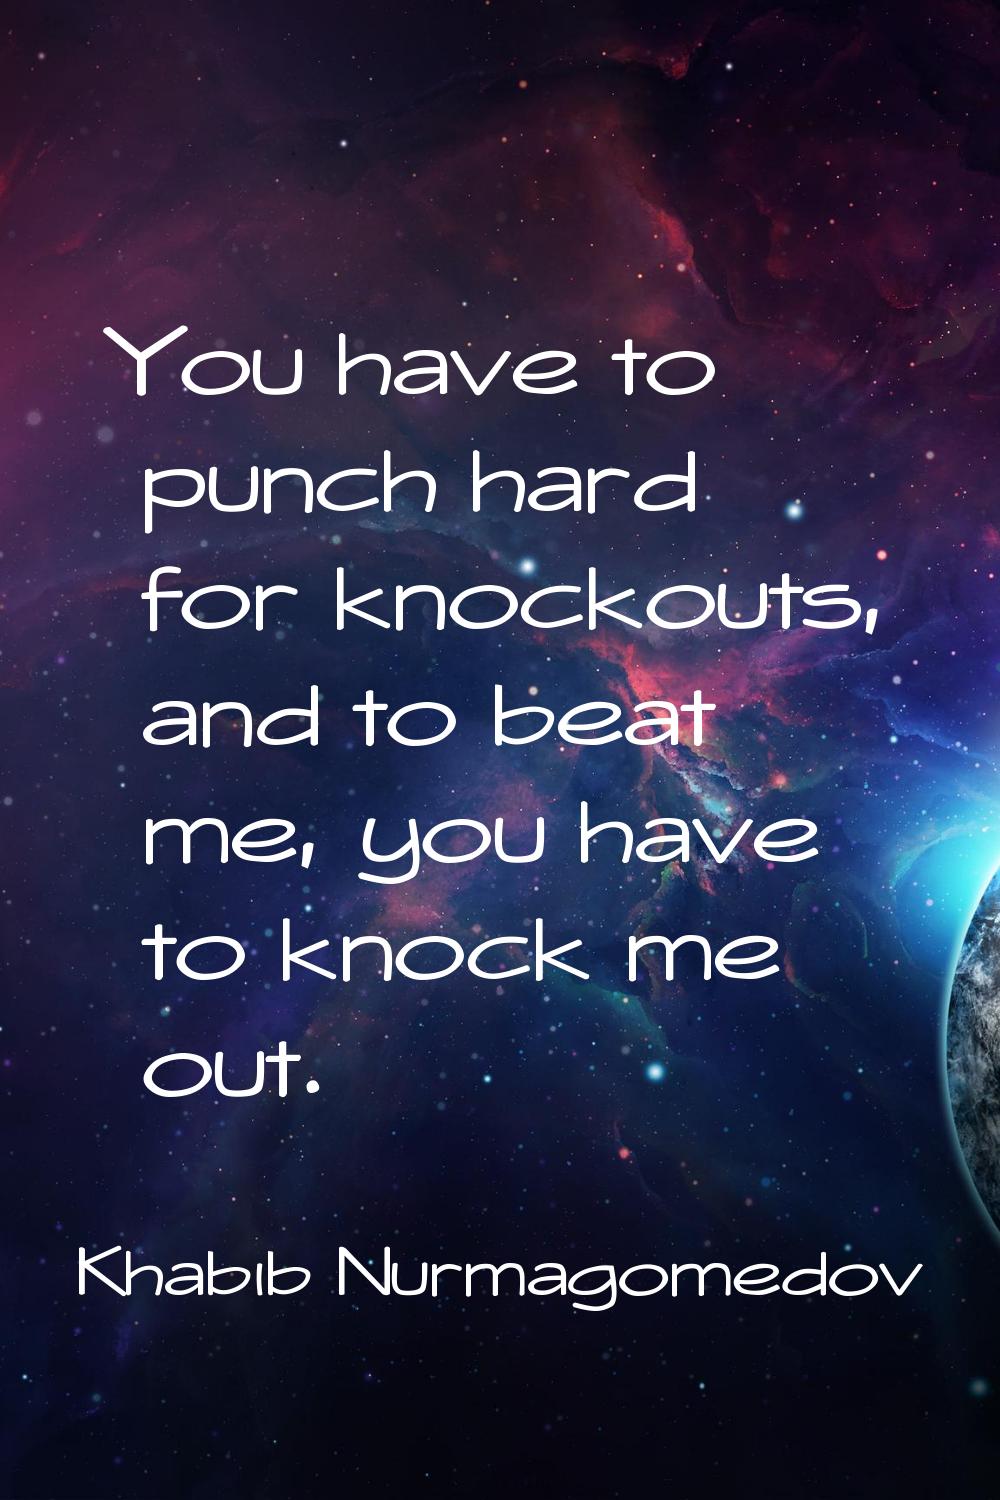 You have to punch hard for knockouts, and to beat me, you have to knock me out.